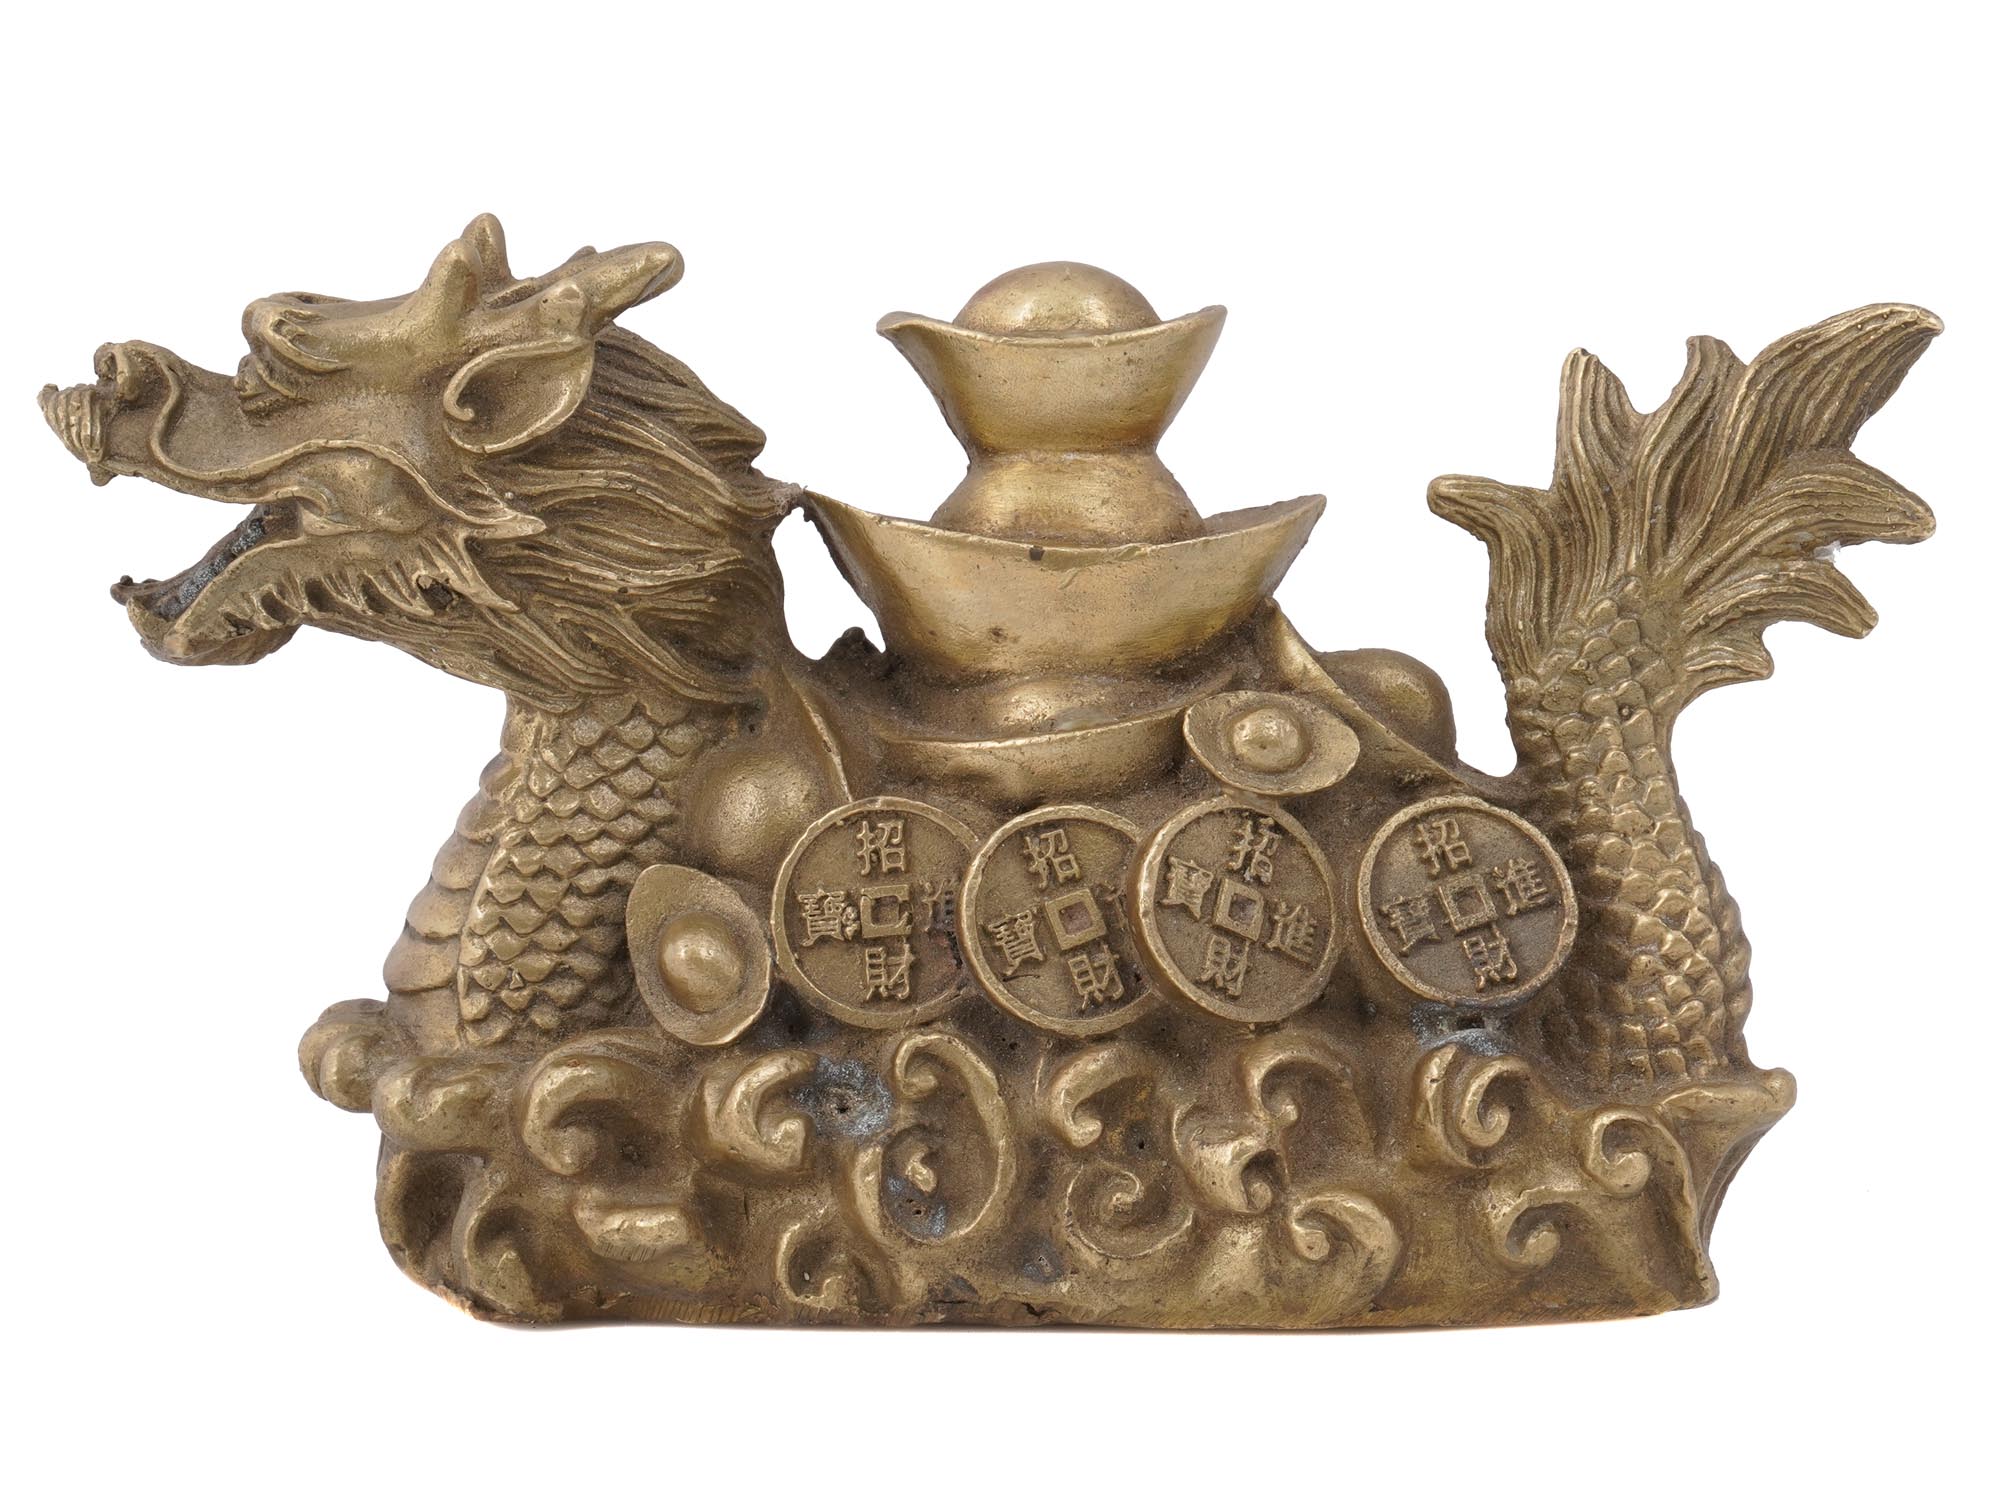 ANTIQUE CHINESE BRONZE DRAGON MONEY LUCKY STATUE PIC-3